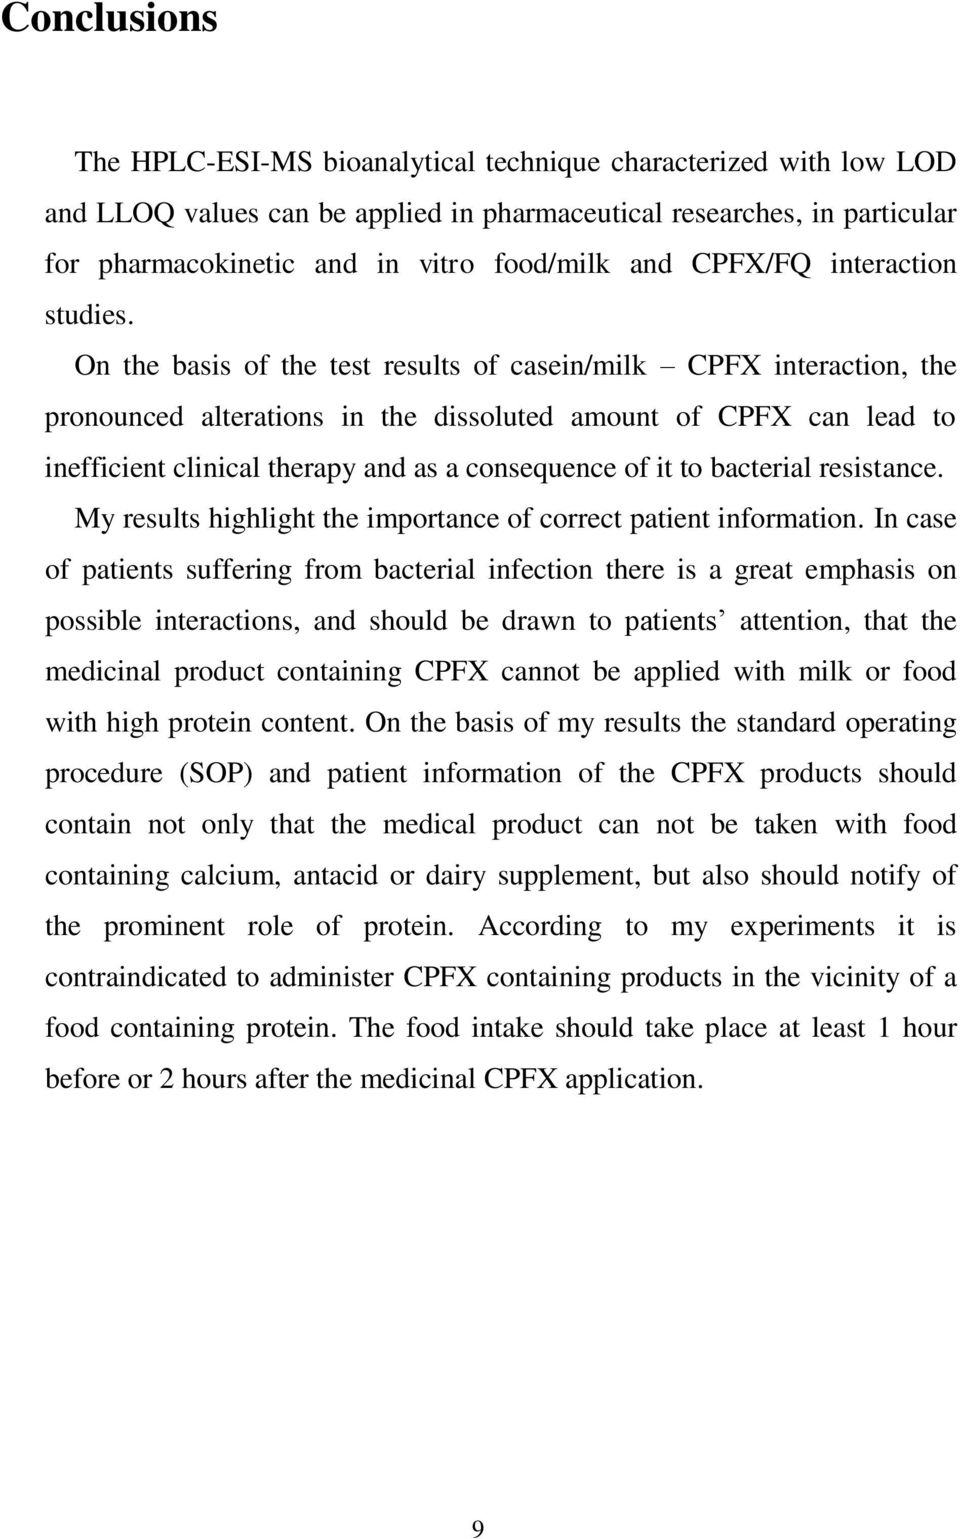 On the basis of the test results of casein/milk CPFX interaction, the pronounced alterations in the dissoluted amount of CPFX can lead to inefficient clinical therapy and as a consequence of it to